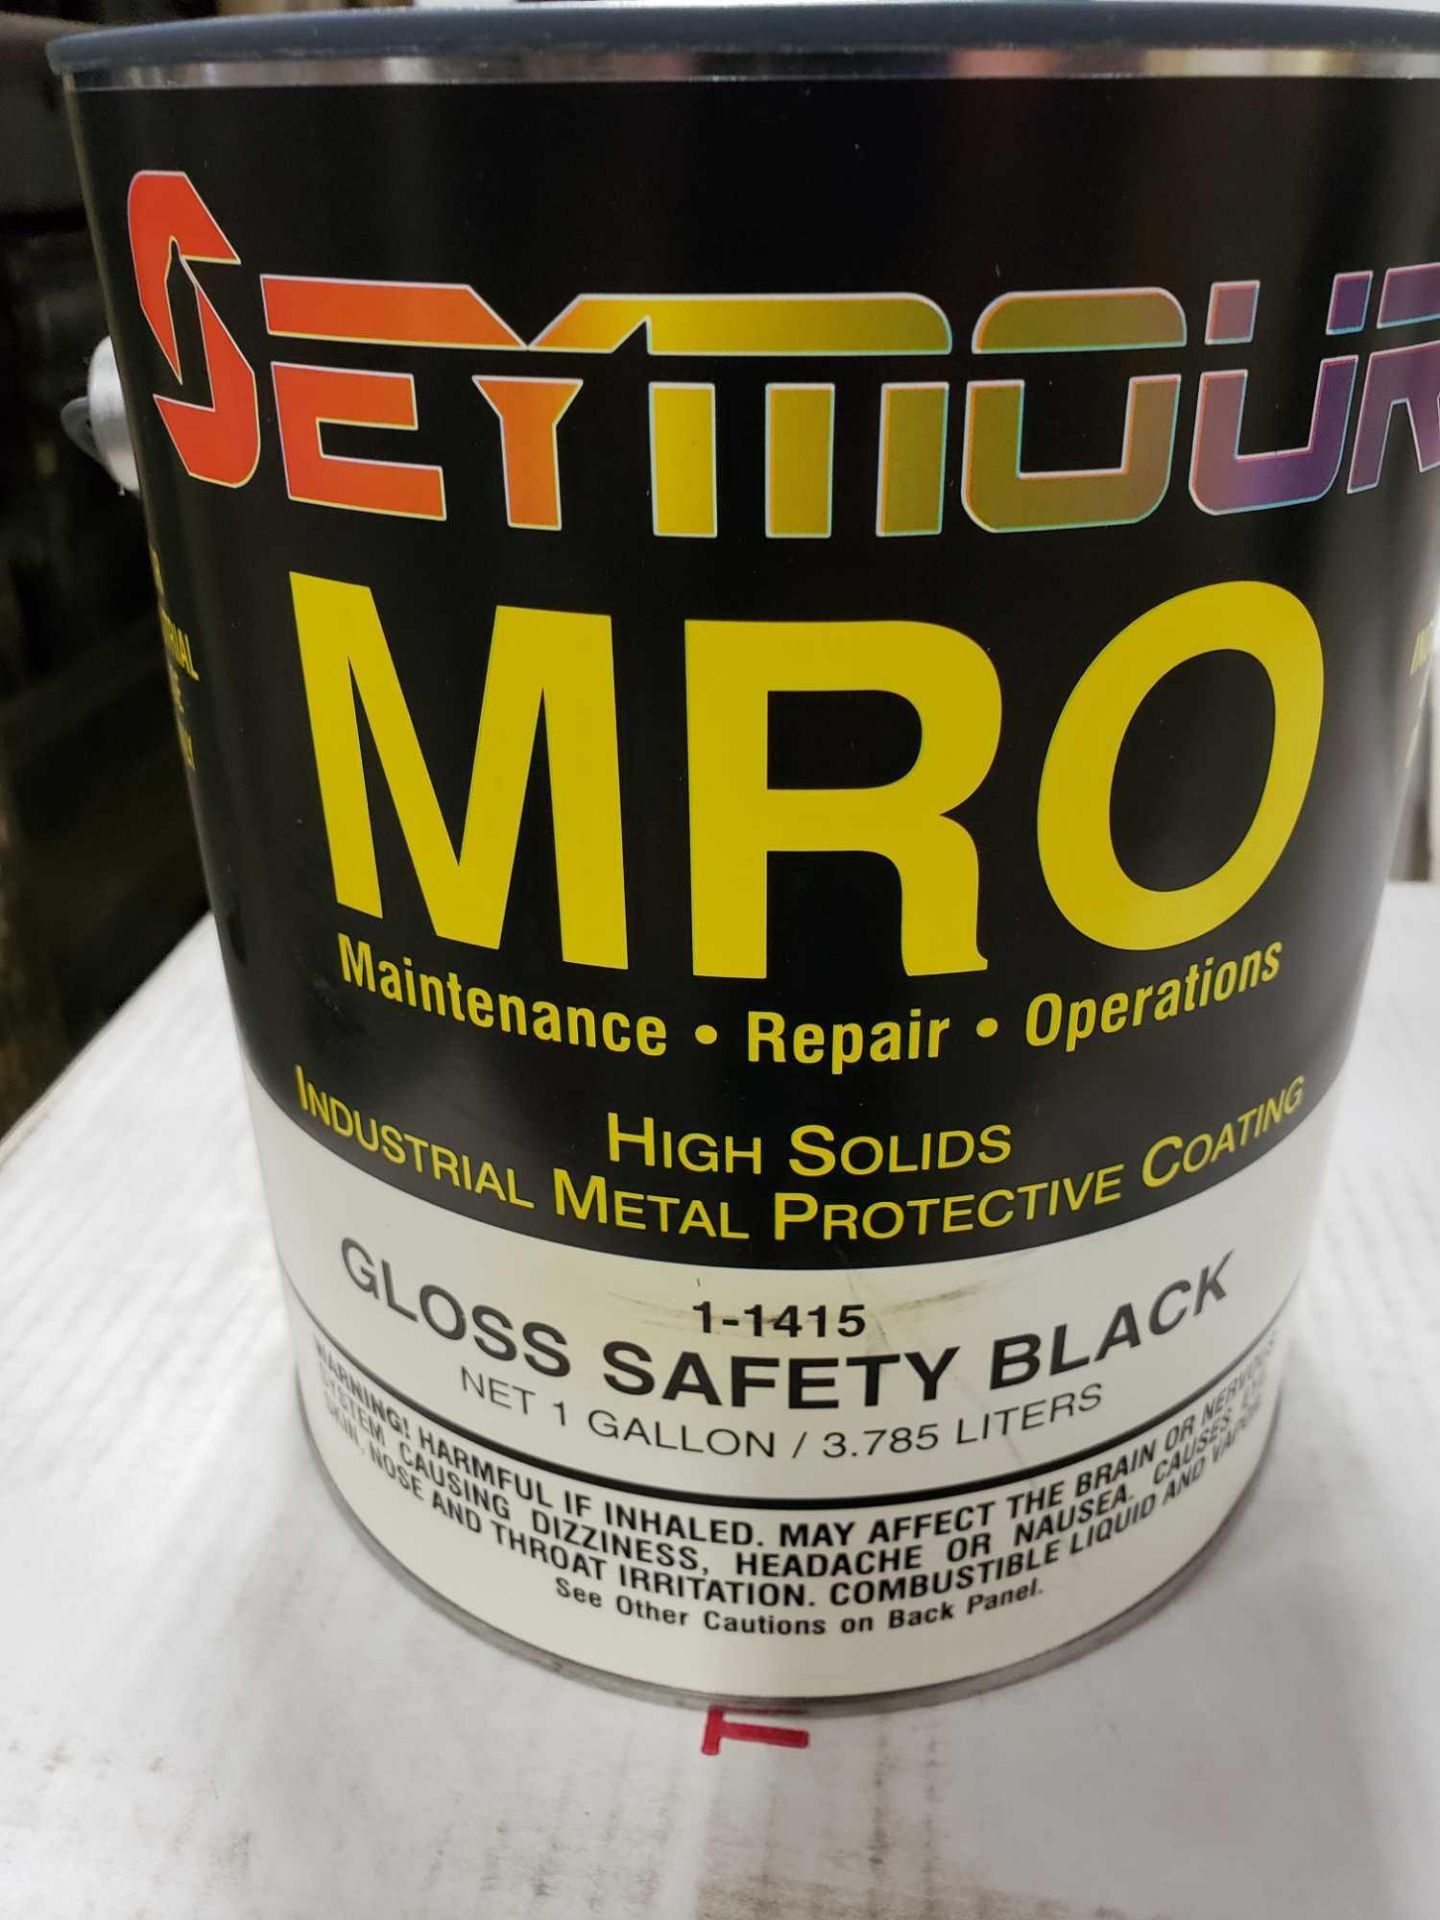 Qty 4 - Seymour MRO paint Gloss Safety Black model 1-1415. New as pictured. - Image 2 of 2